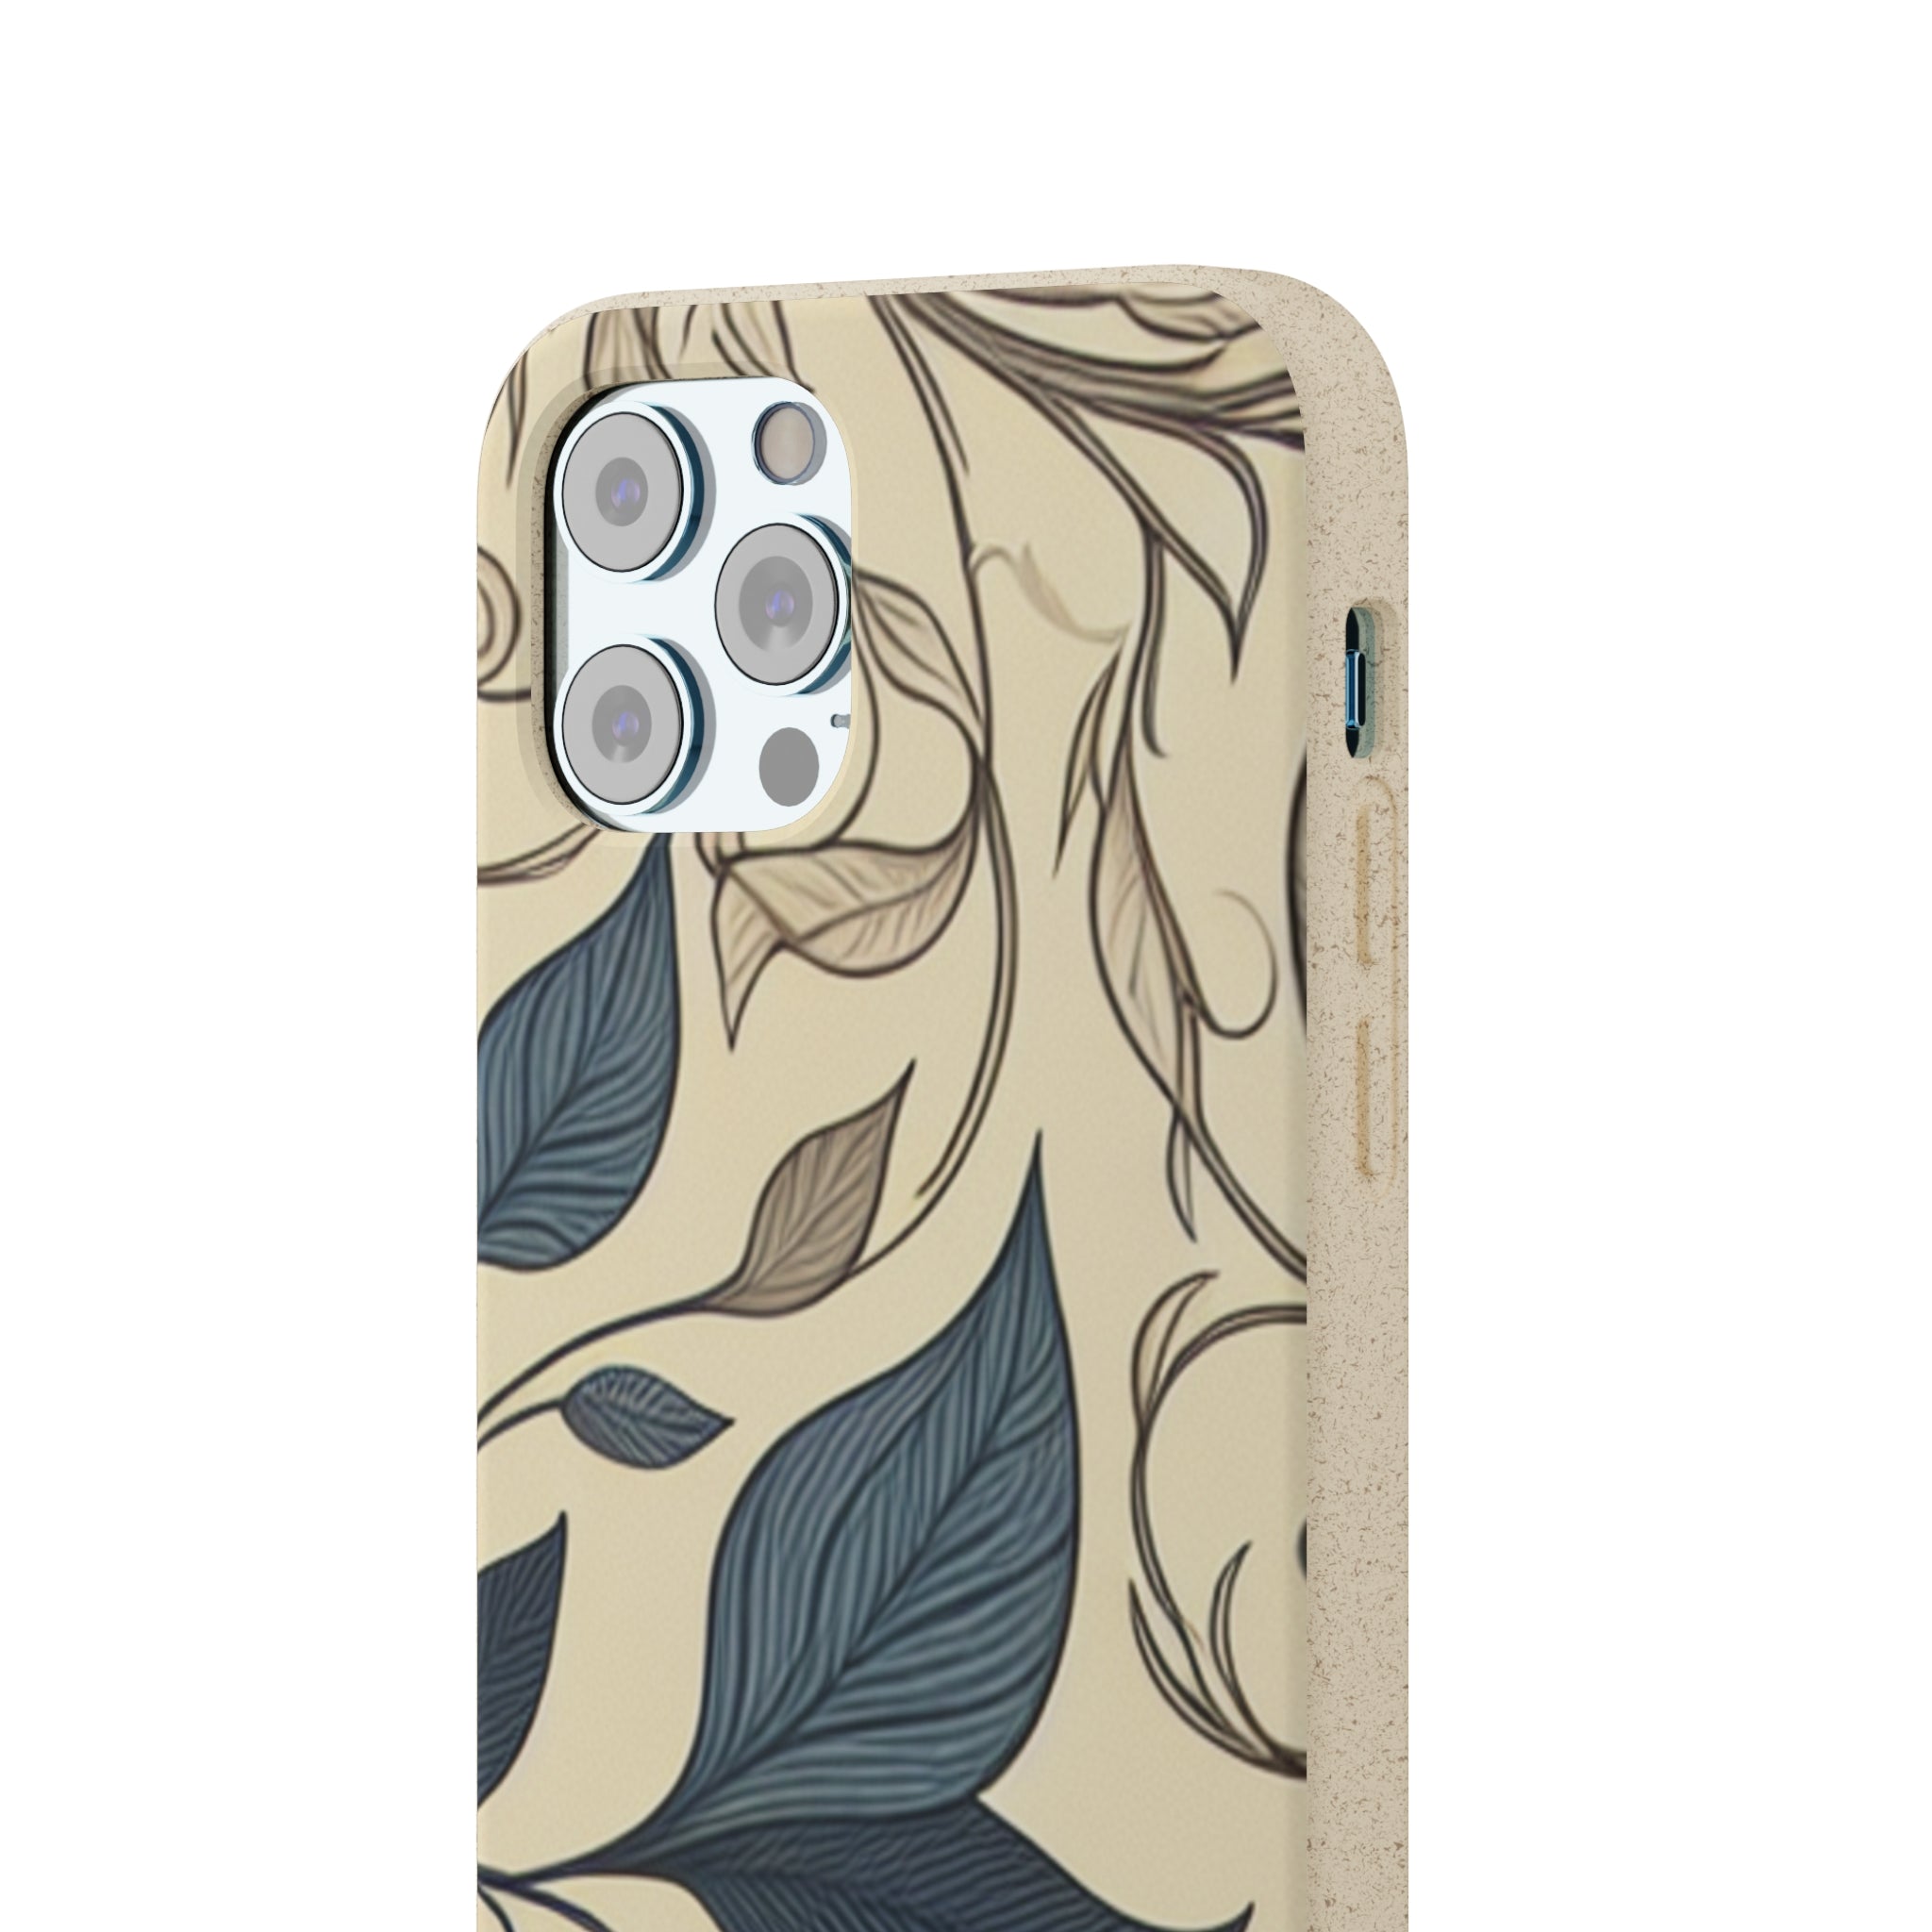 Tom Zhao - Biodegradable iPhone Cases